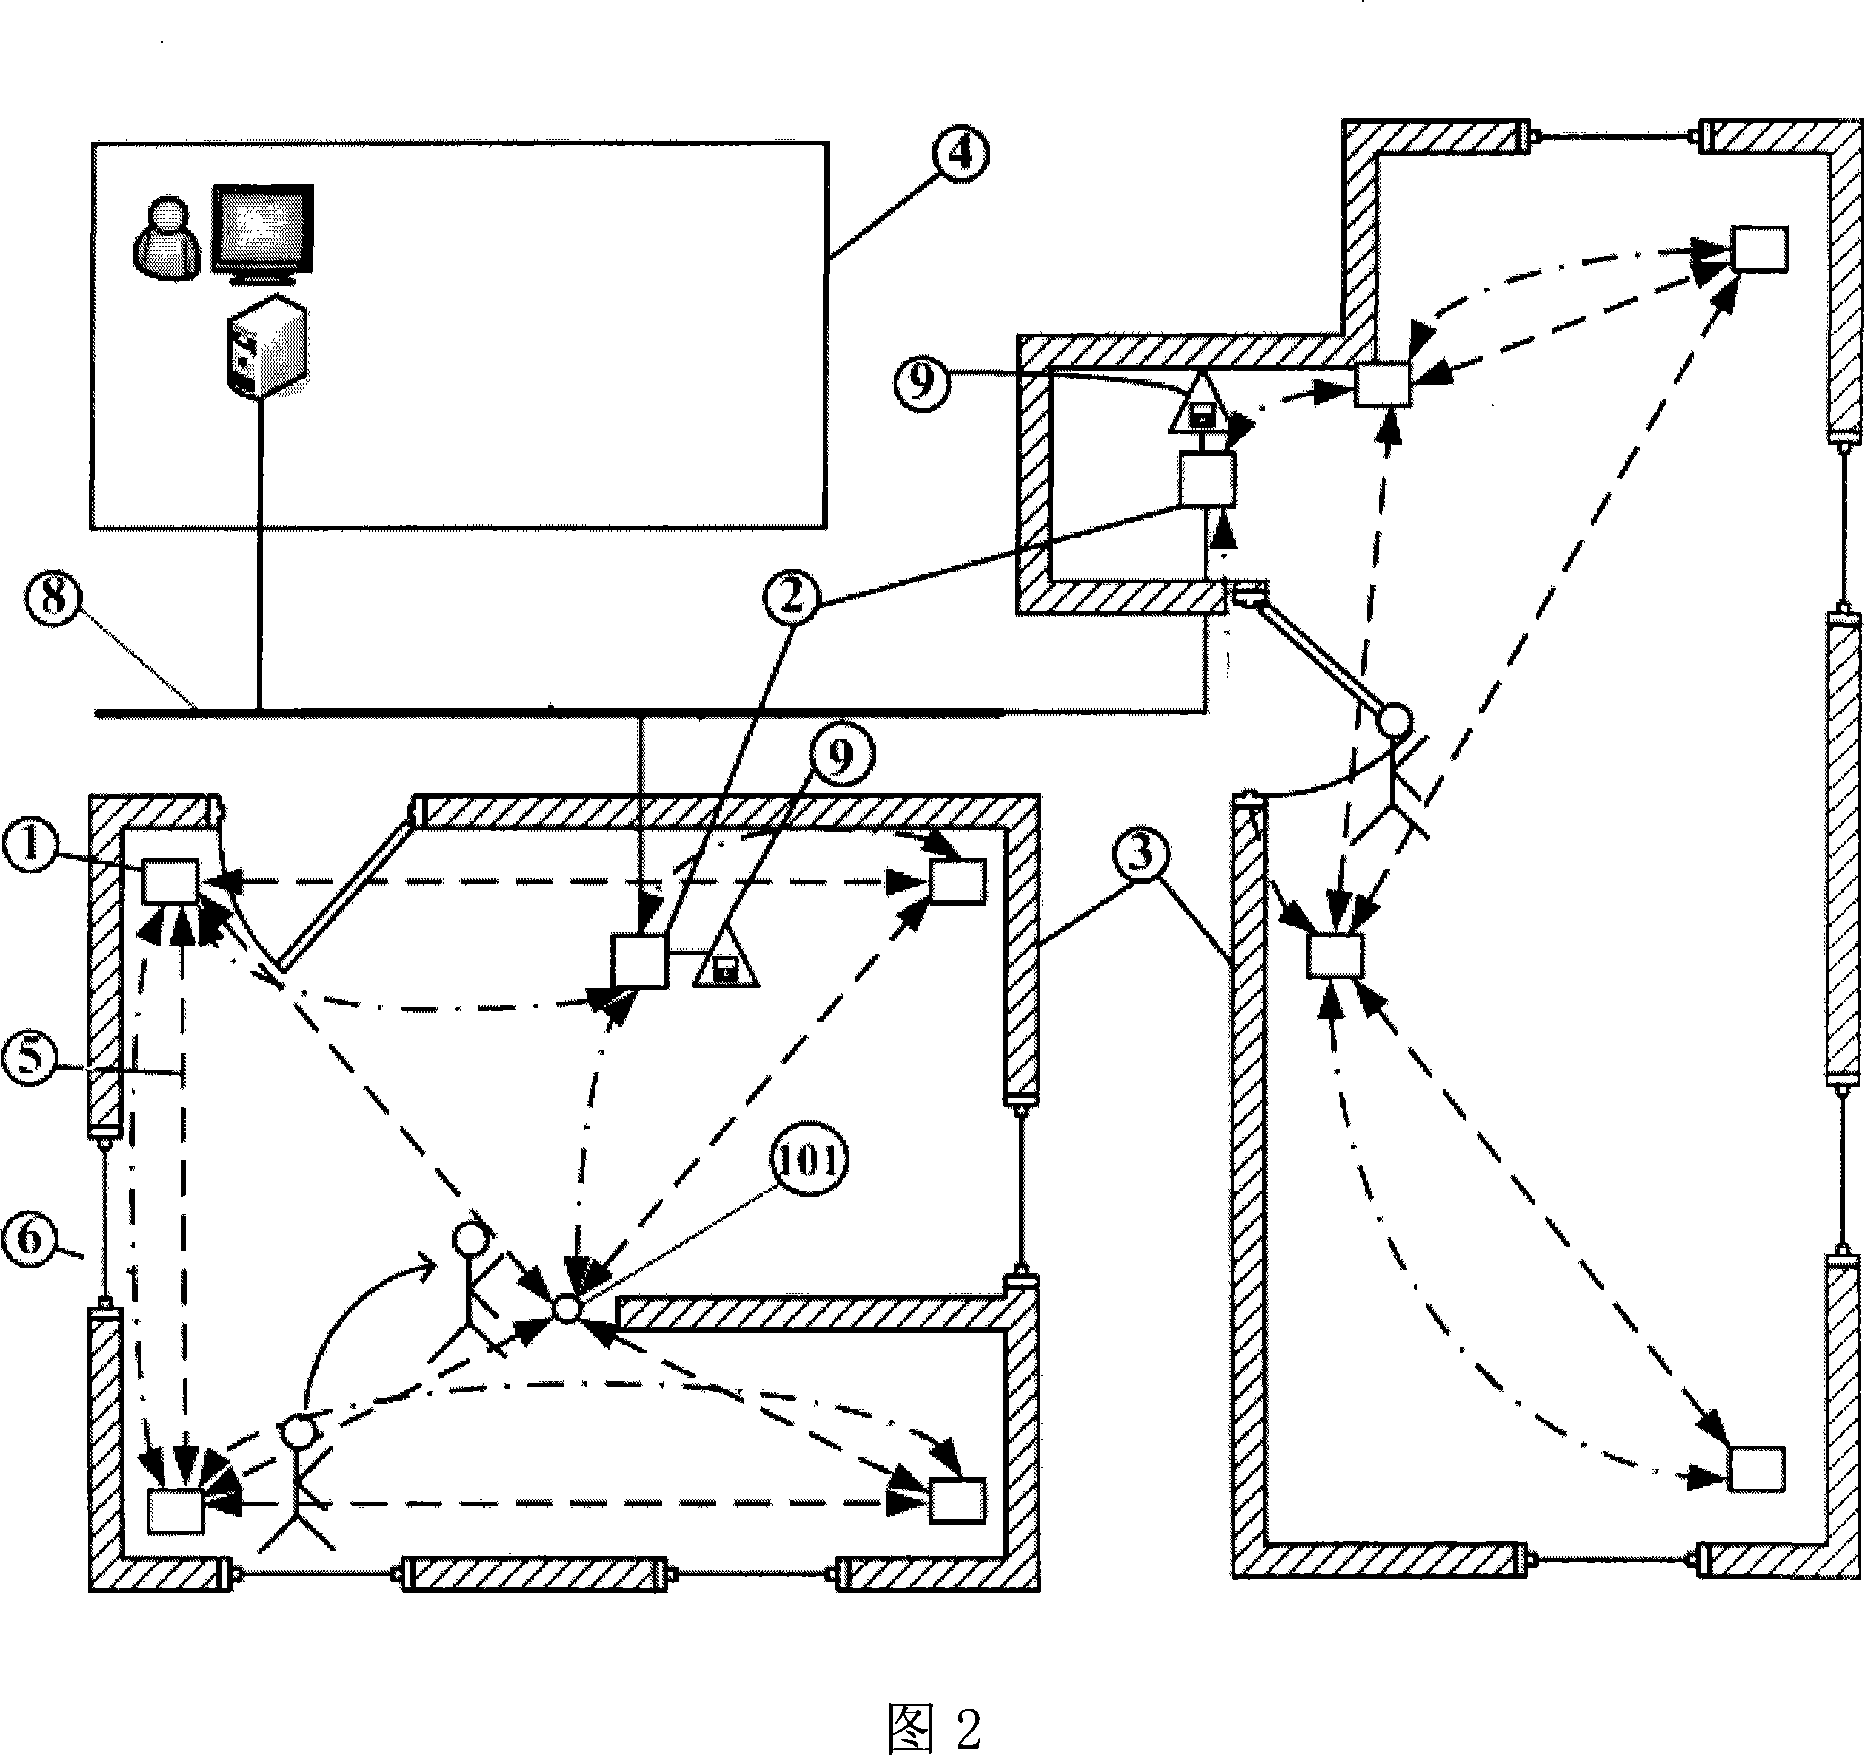 Intrusion detection system and method